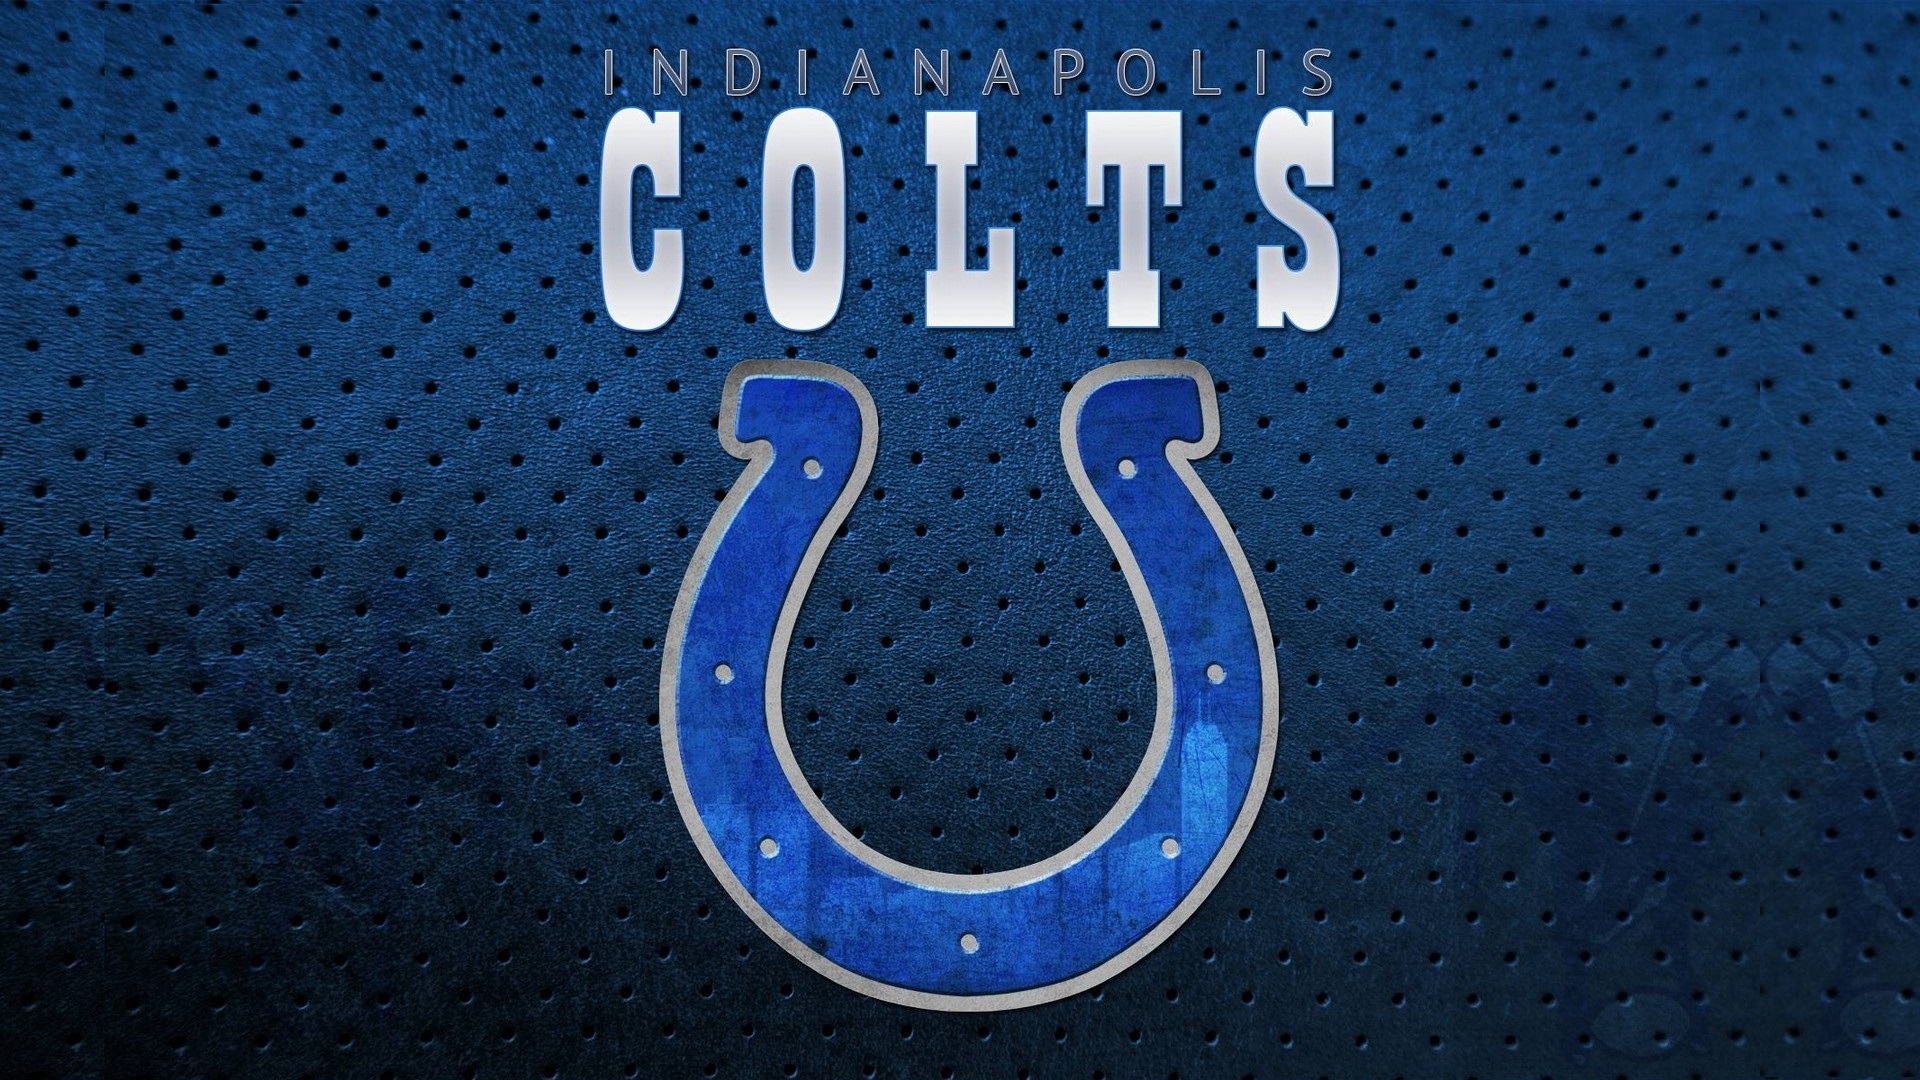 HD Indianapolis Colts Backgrounds with high-resolution 1920x1080 pixel. Download and set as wallpaper for Desktop Computer, Apple iPhone X, XS Max, XR, 8, 7, 6, SE, iPad, Android